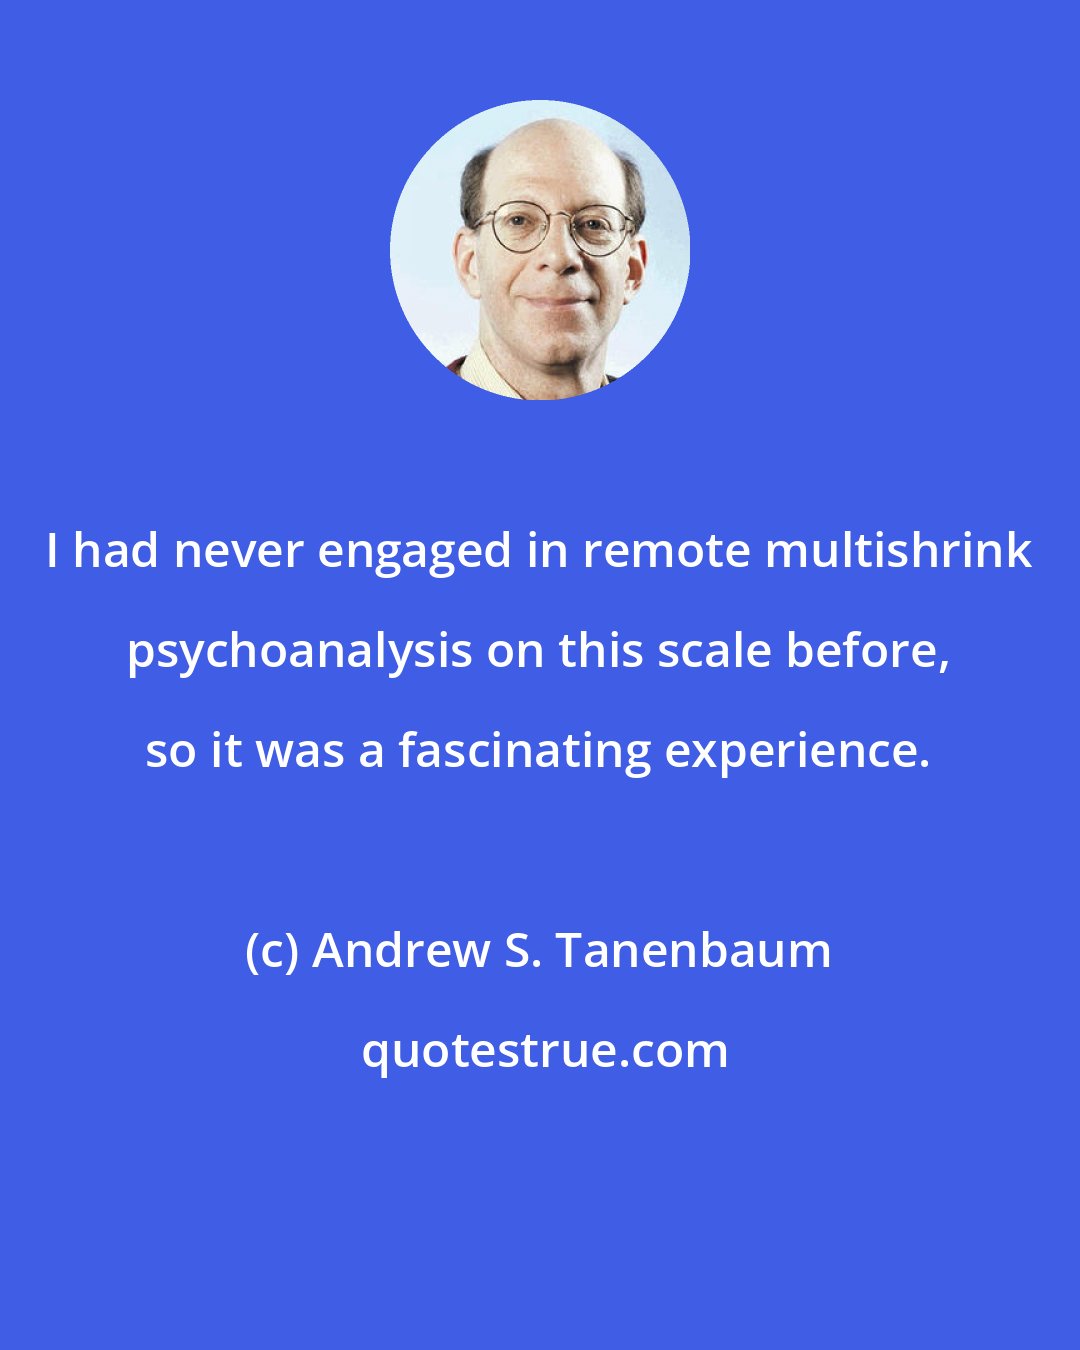 Andrew S. Tanenbaum: I had never engaged in remote multishrink psychoanalysis on this scale before, so it was a fascinating experience.